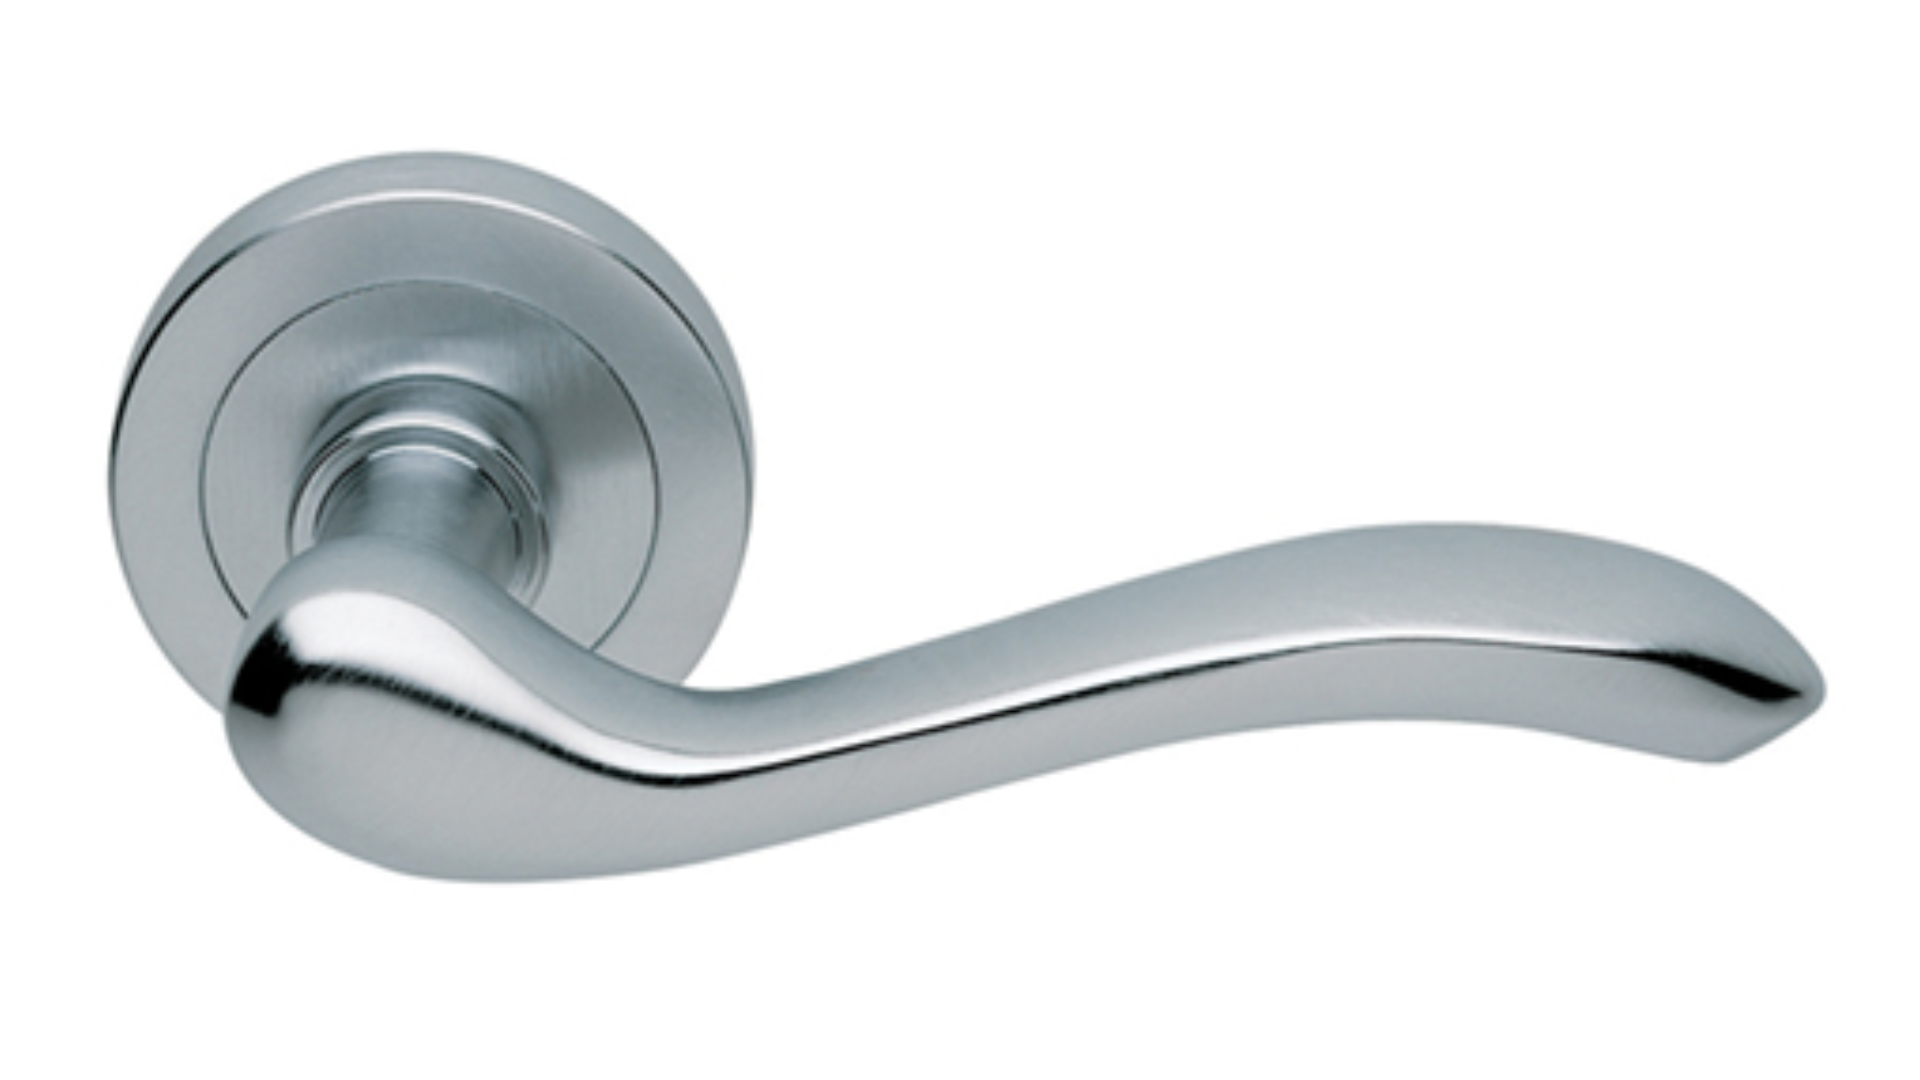 The Erica door handle in satin chrome on a white background.